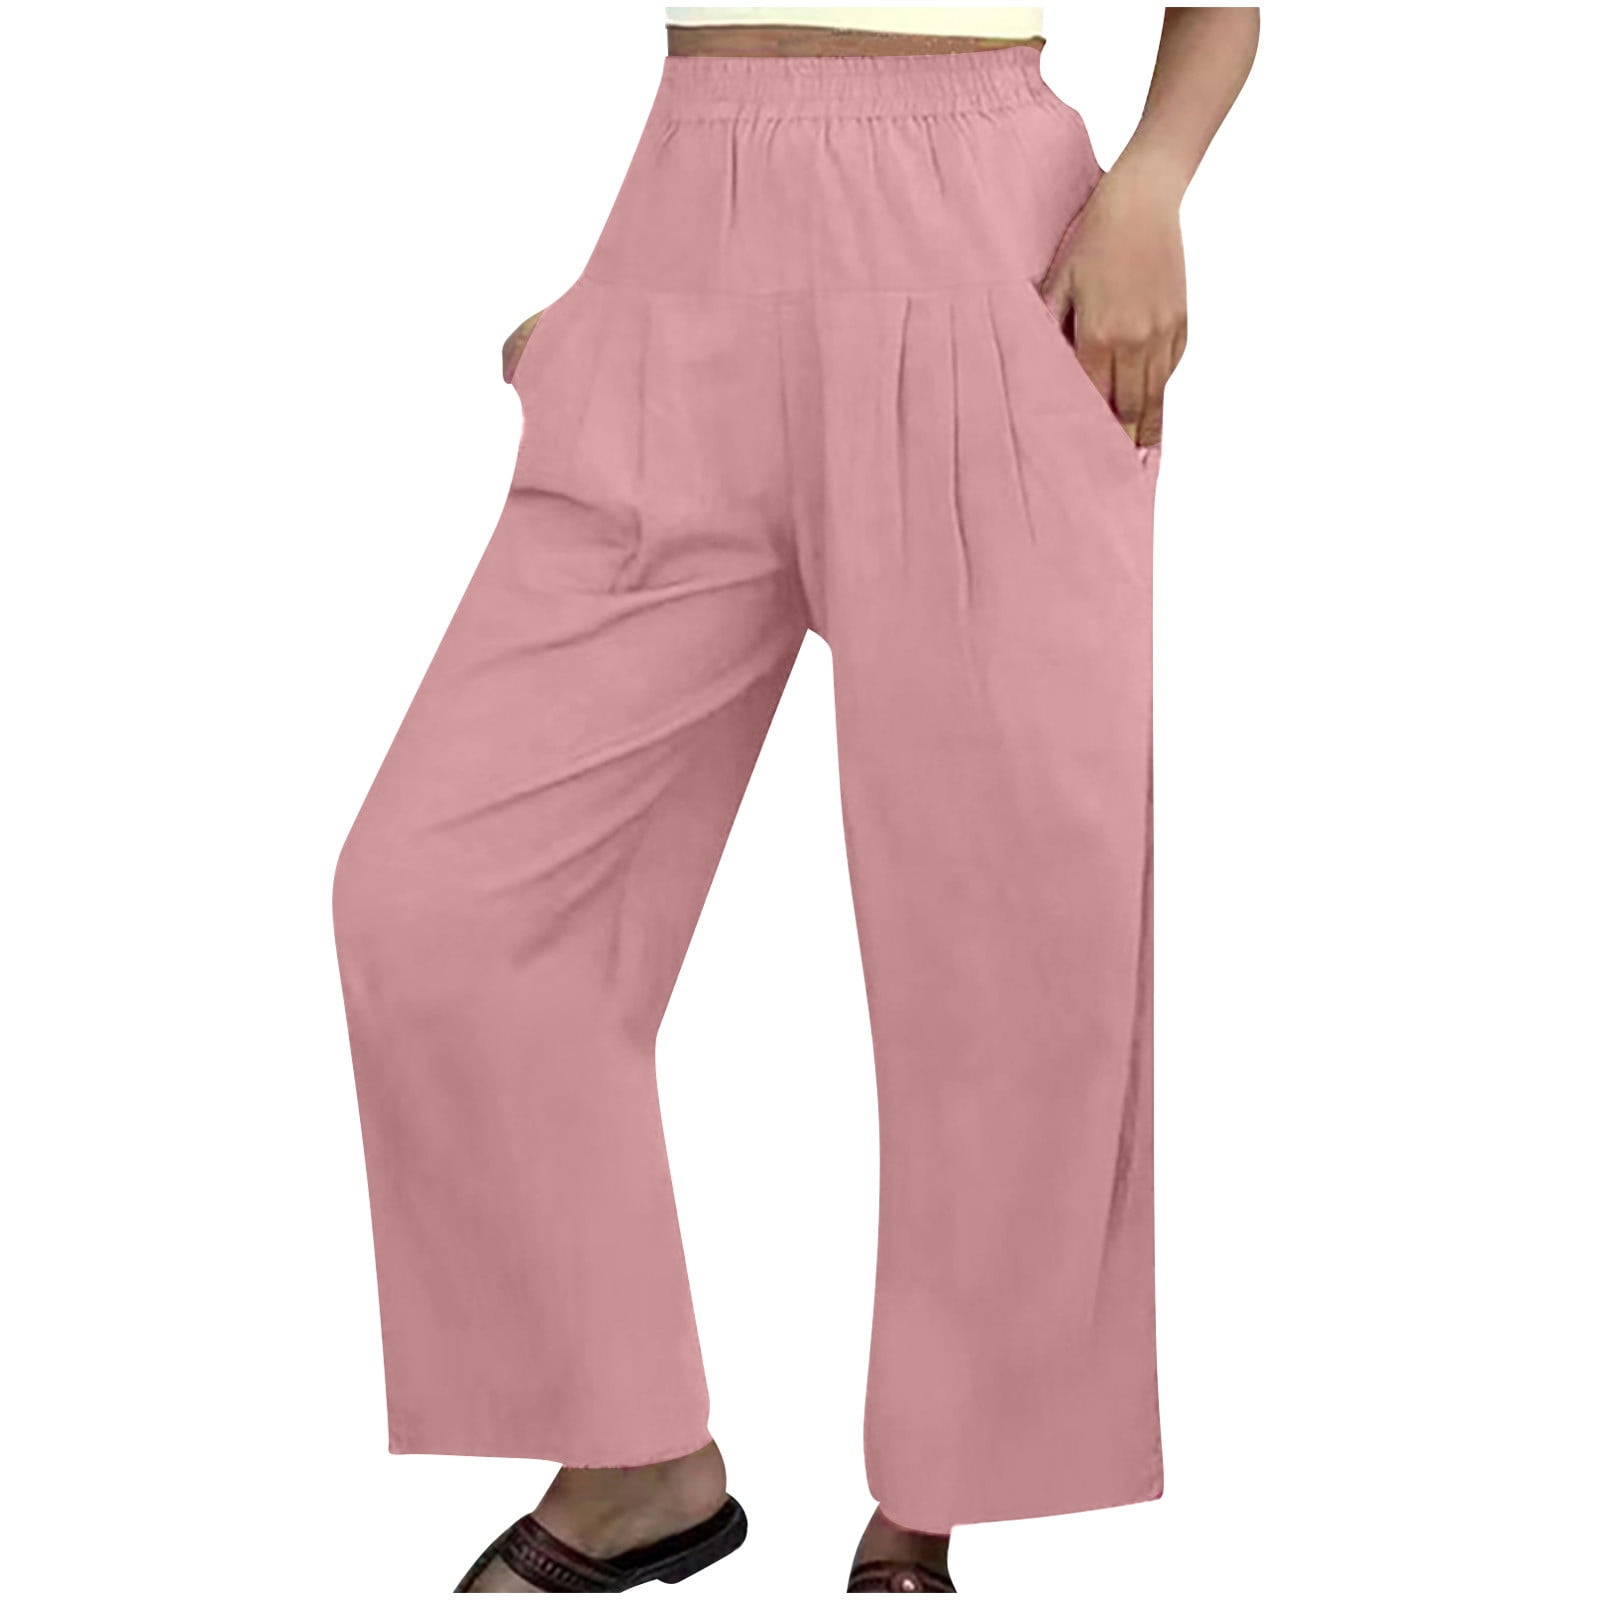 Best Summer Pants 2019 | 66 Pairs to Shop